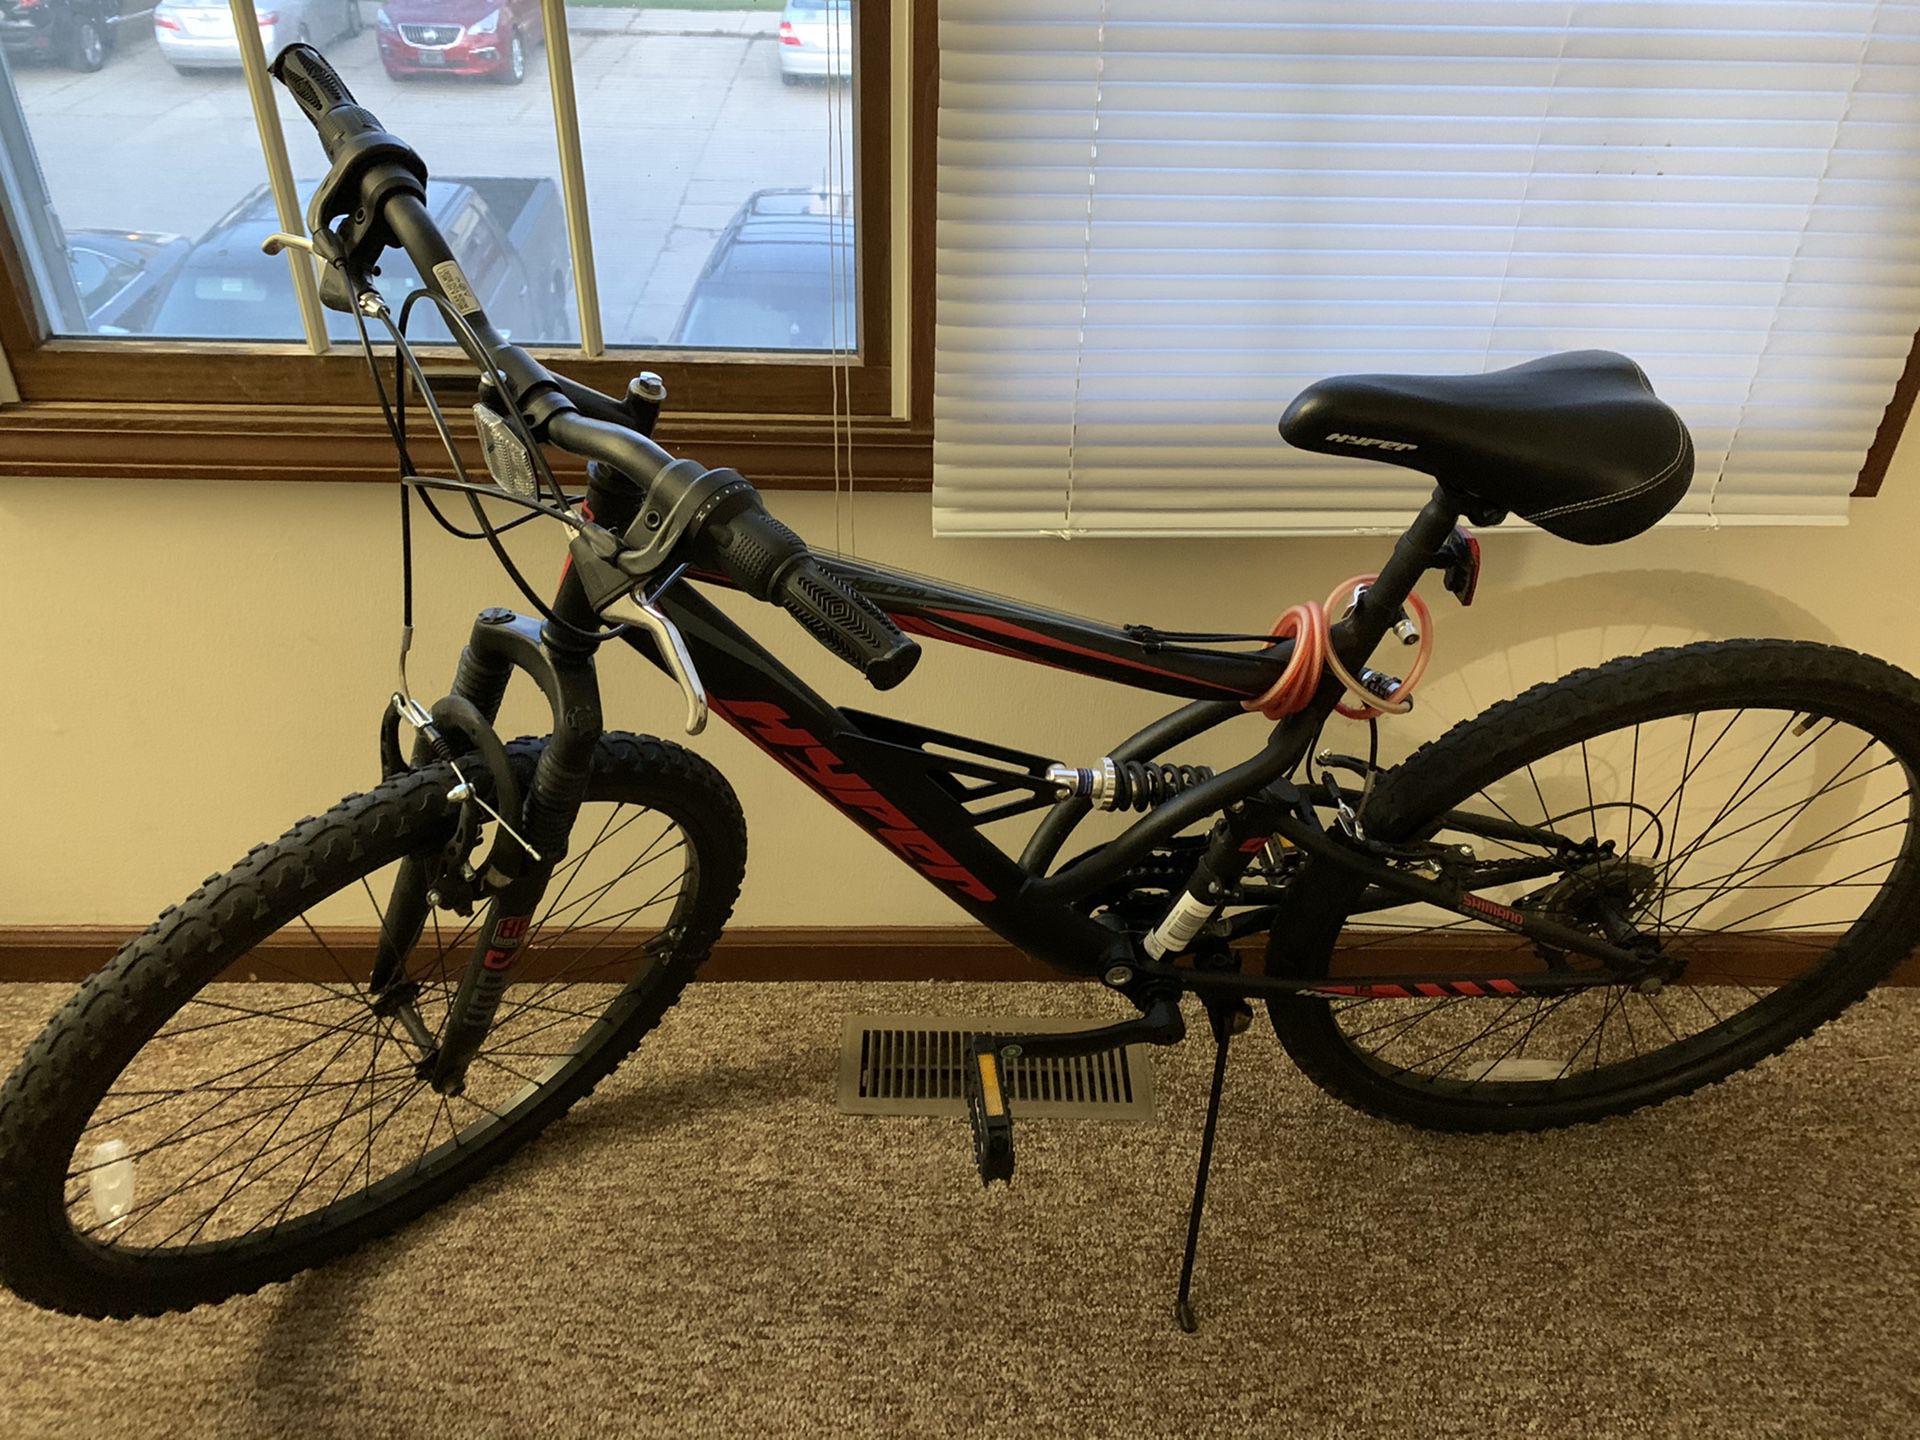 Hyper 26" Shocker Men's Dual Suspension Mountain Bike, Black It’s almost brand new Brand new in $124 at Walmart Condition: Like new